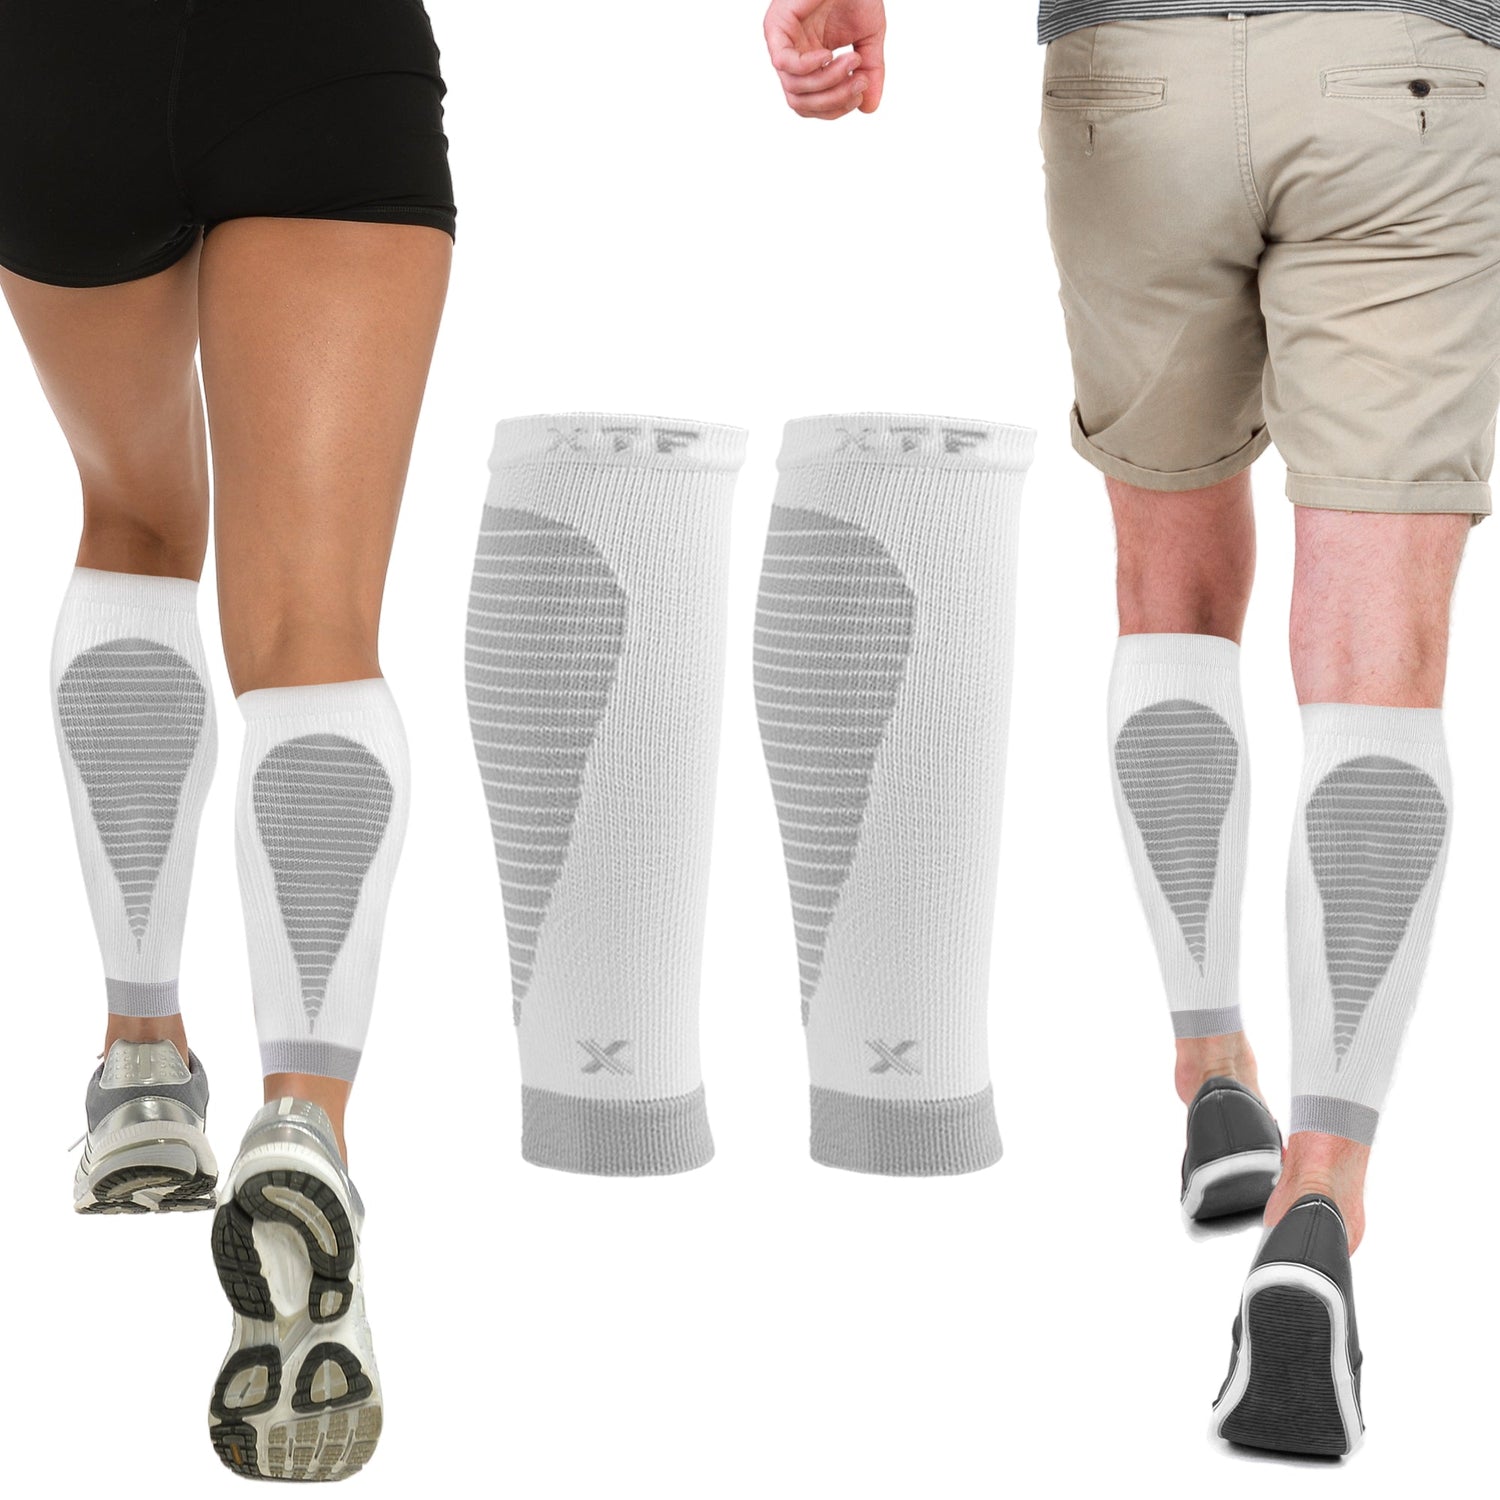 Targeted Compression Calf Sleeves – Extreme Fit